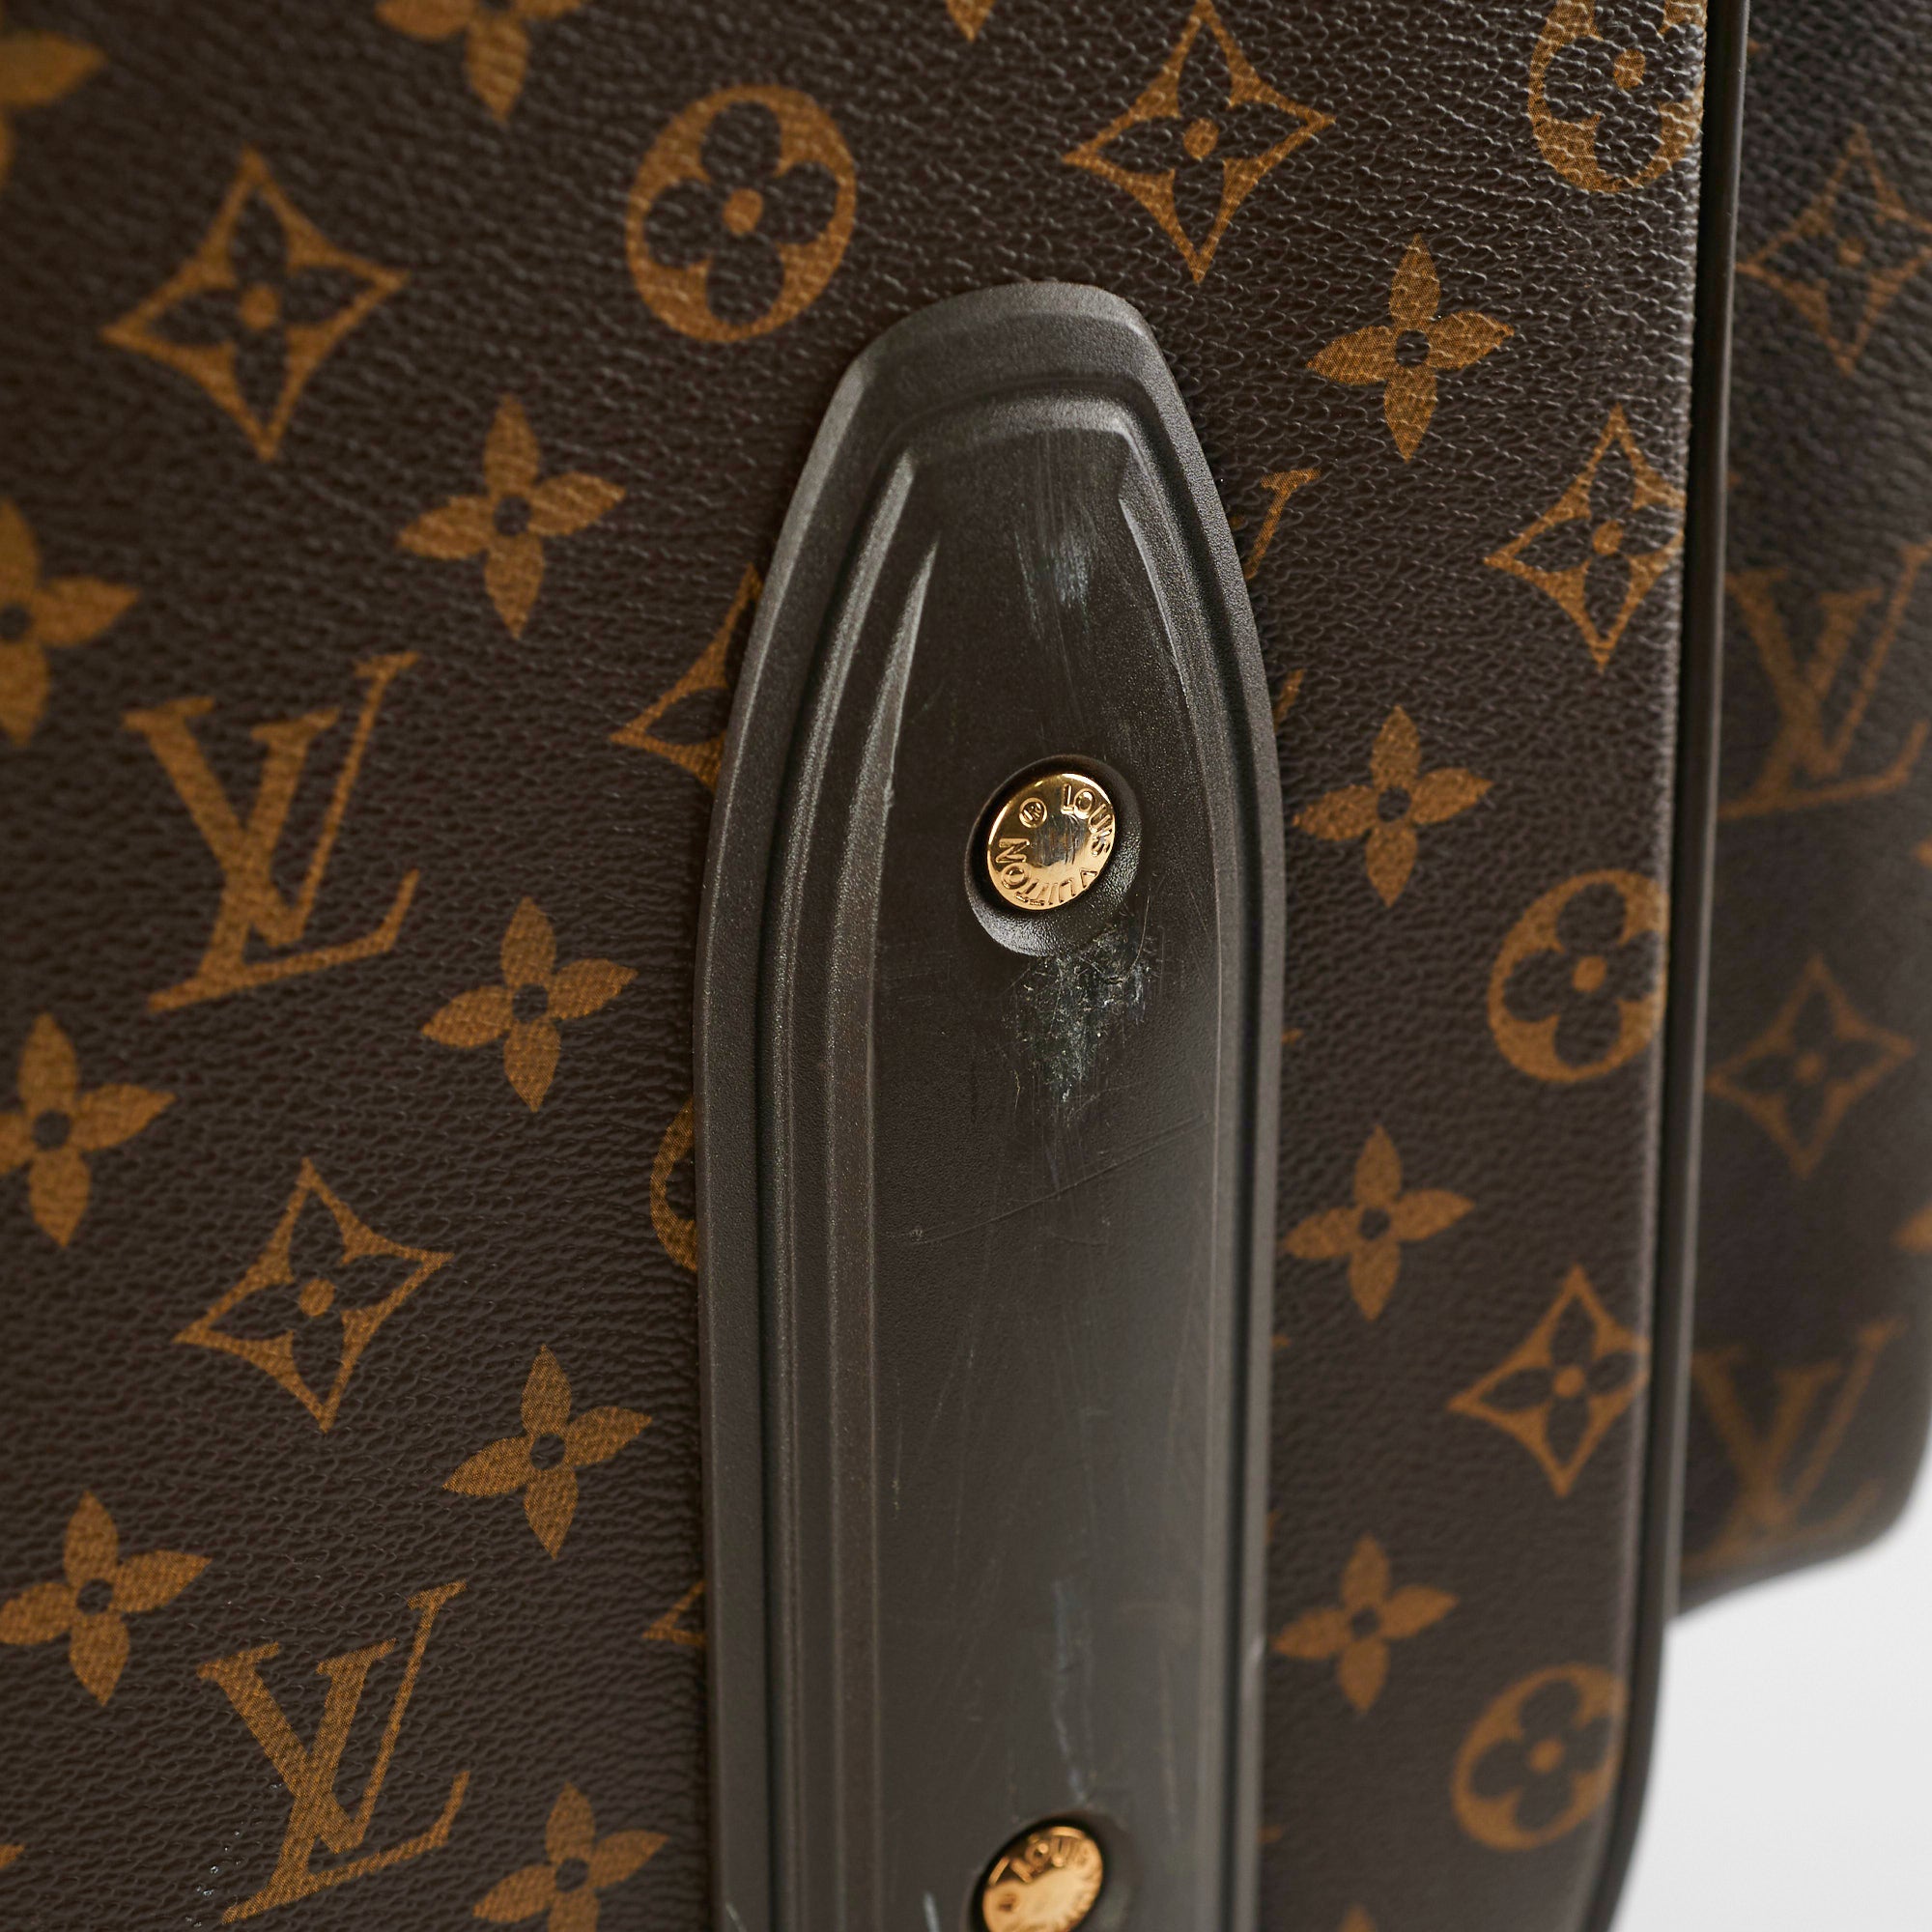 Louis Vuitton Bosphore Trolley Rolling Luggage Monogram Canvas  Weekend/Travel Bag - The Lux Portal